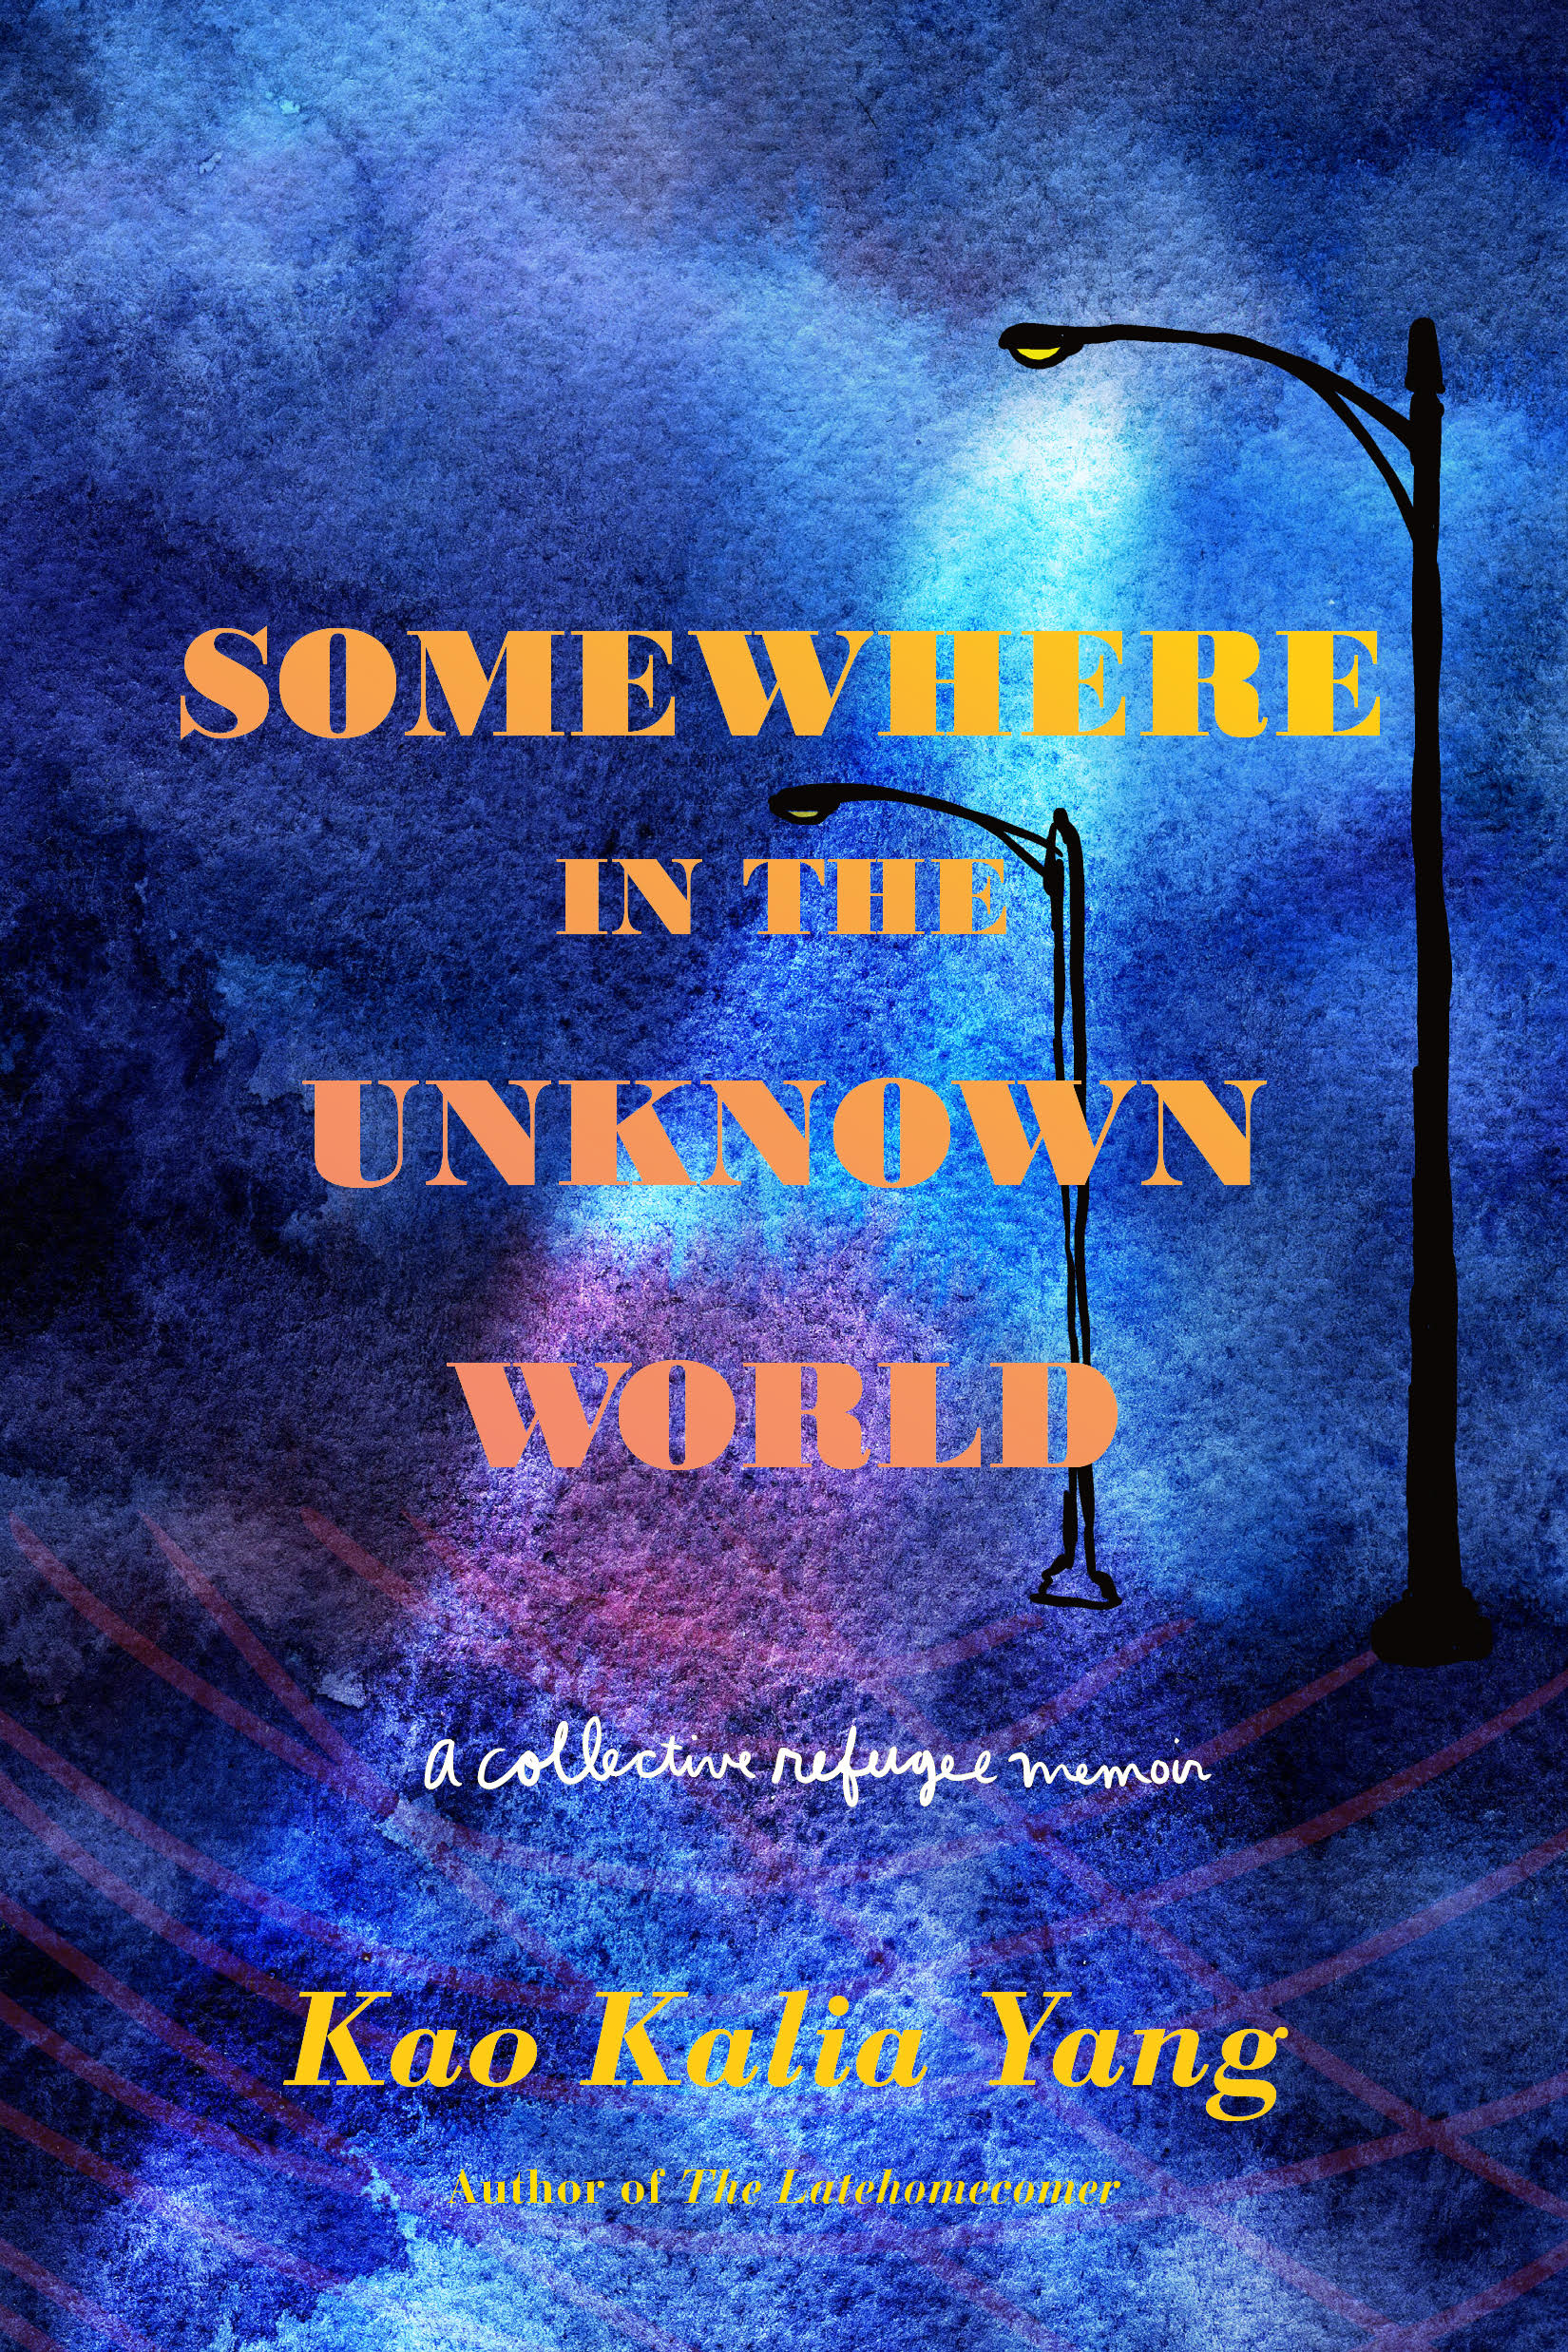 Book Title: Somewhere in the Unknown World: A collective refugee memoir by Kao Kalia Yang